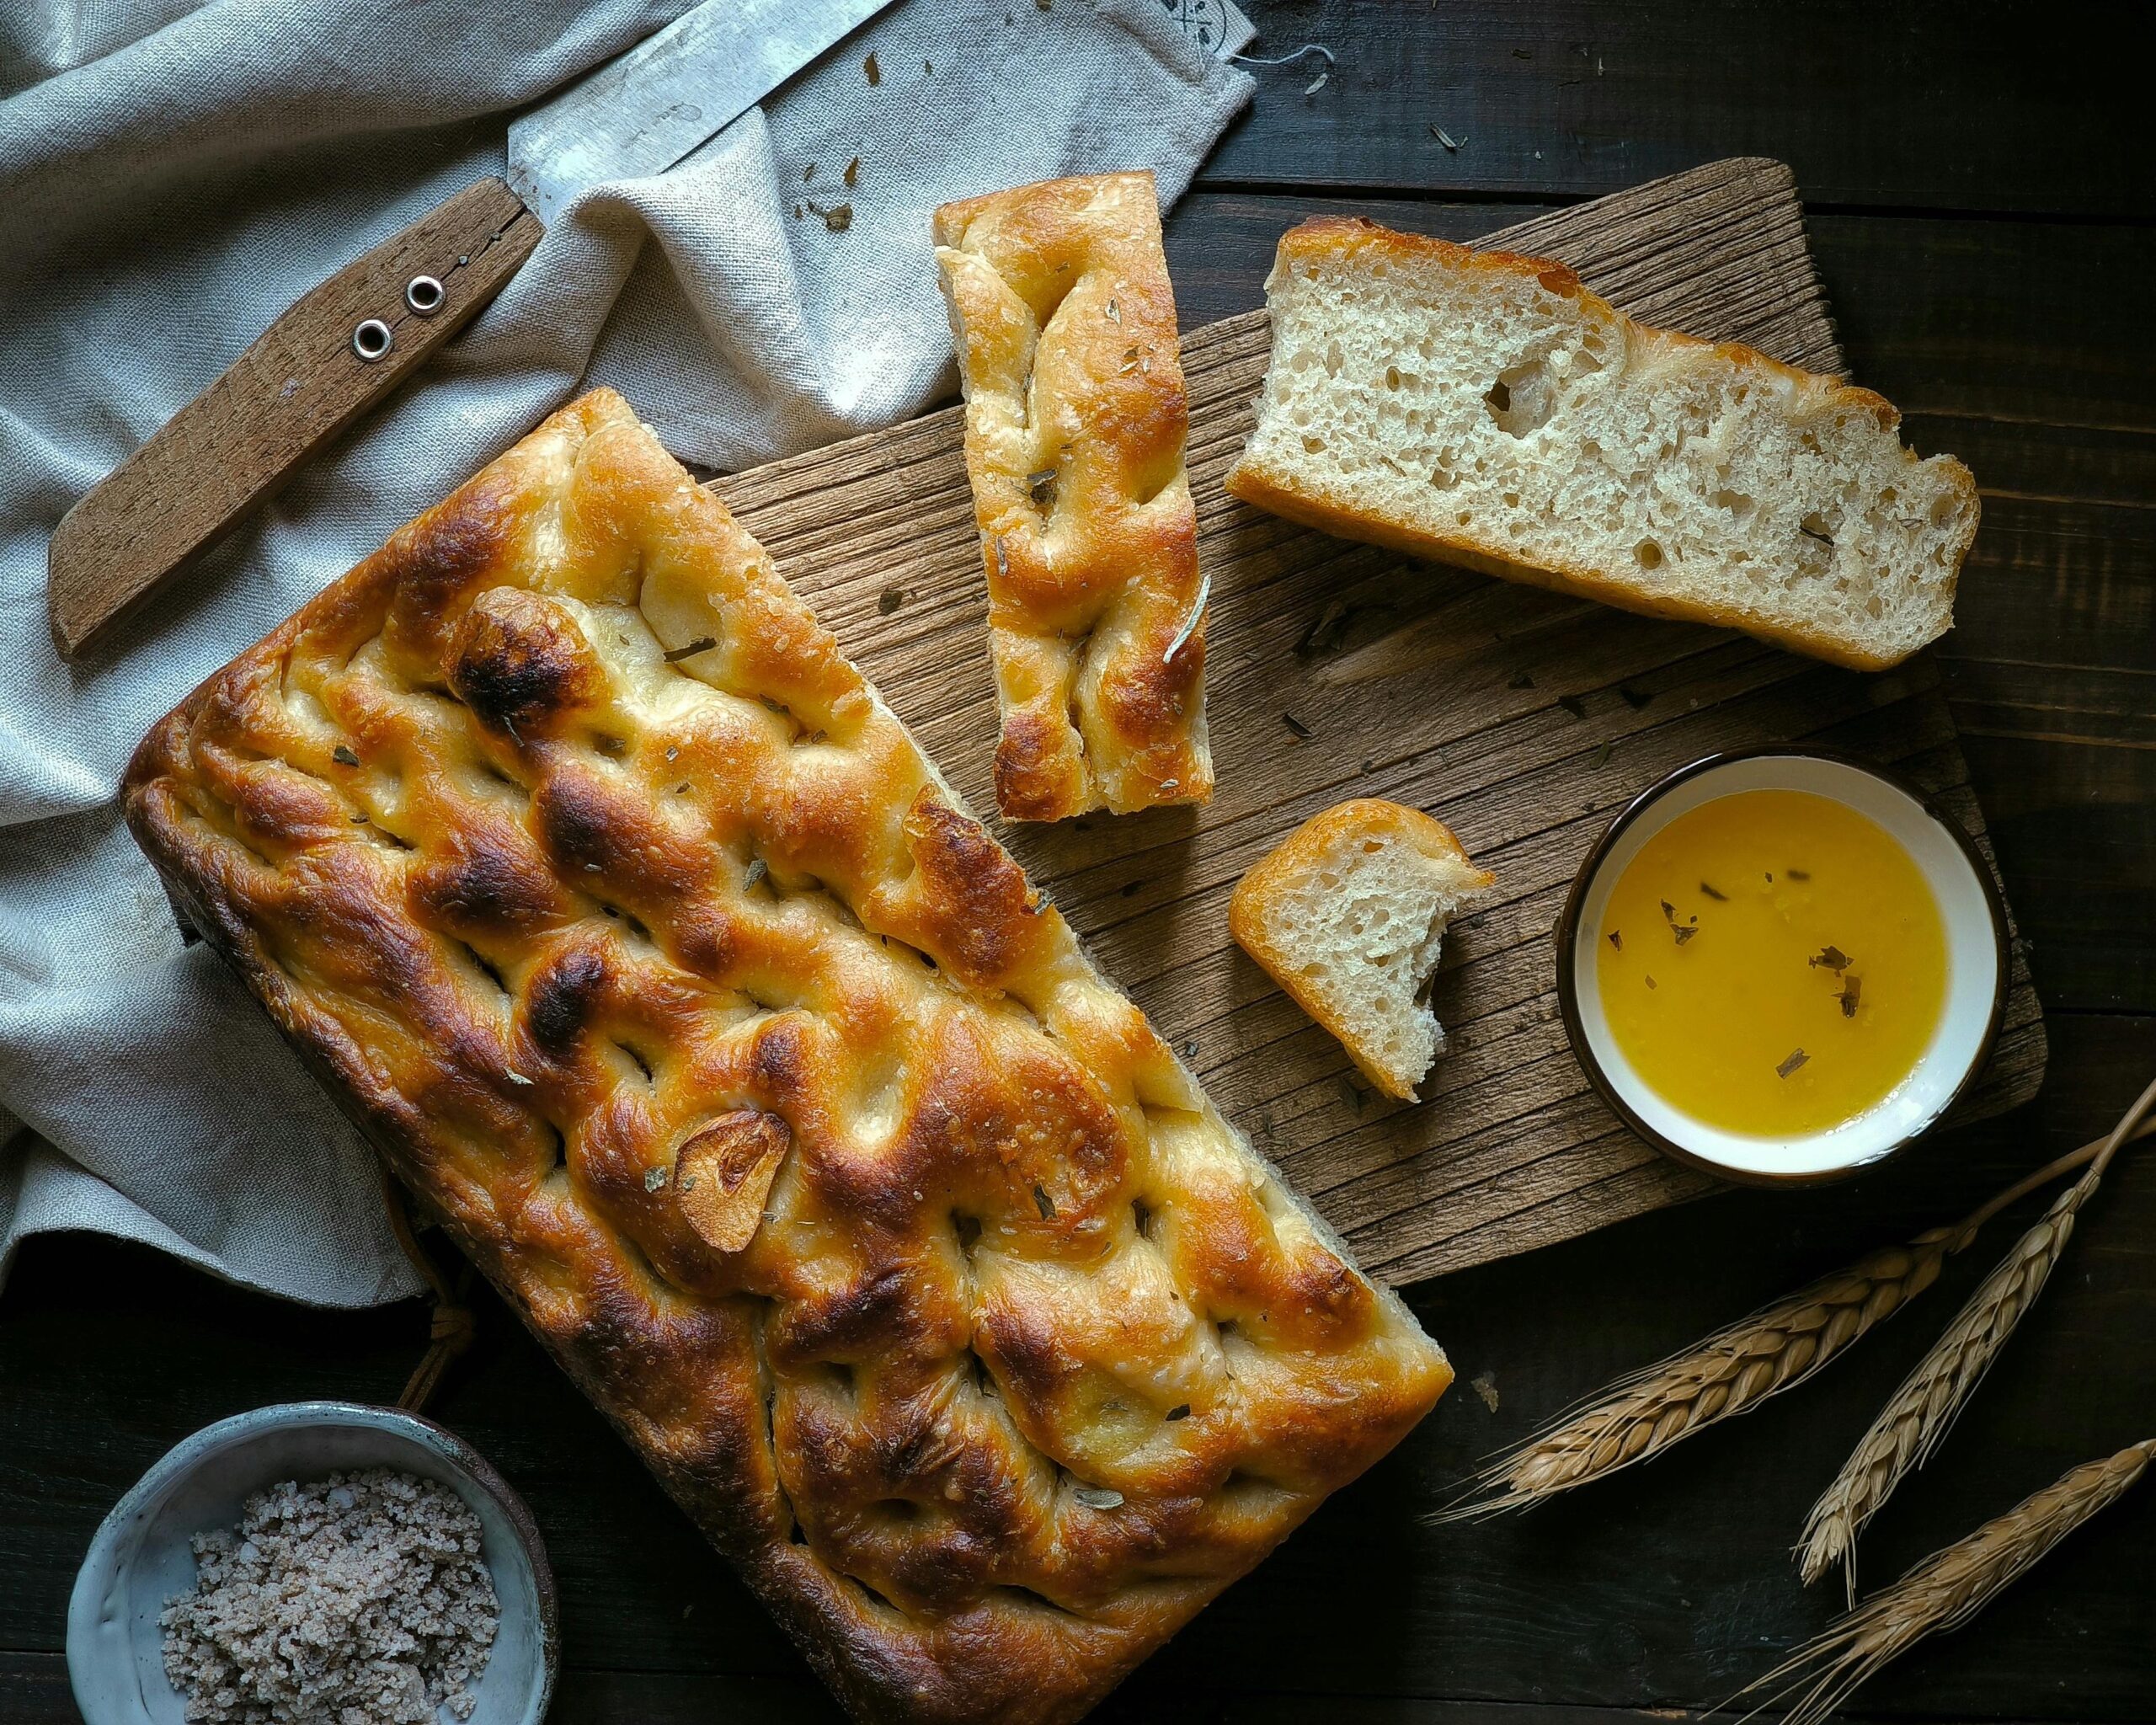 When's the last time you tried to bake with cheese? While we’re used to seeing cheese on pizzas and charcuterie boards, it can also be the secret ingredient in divine baked goods!